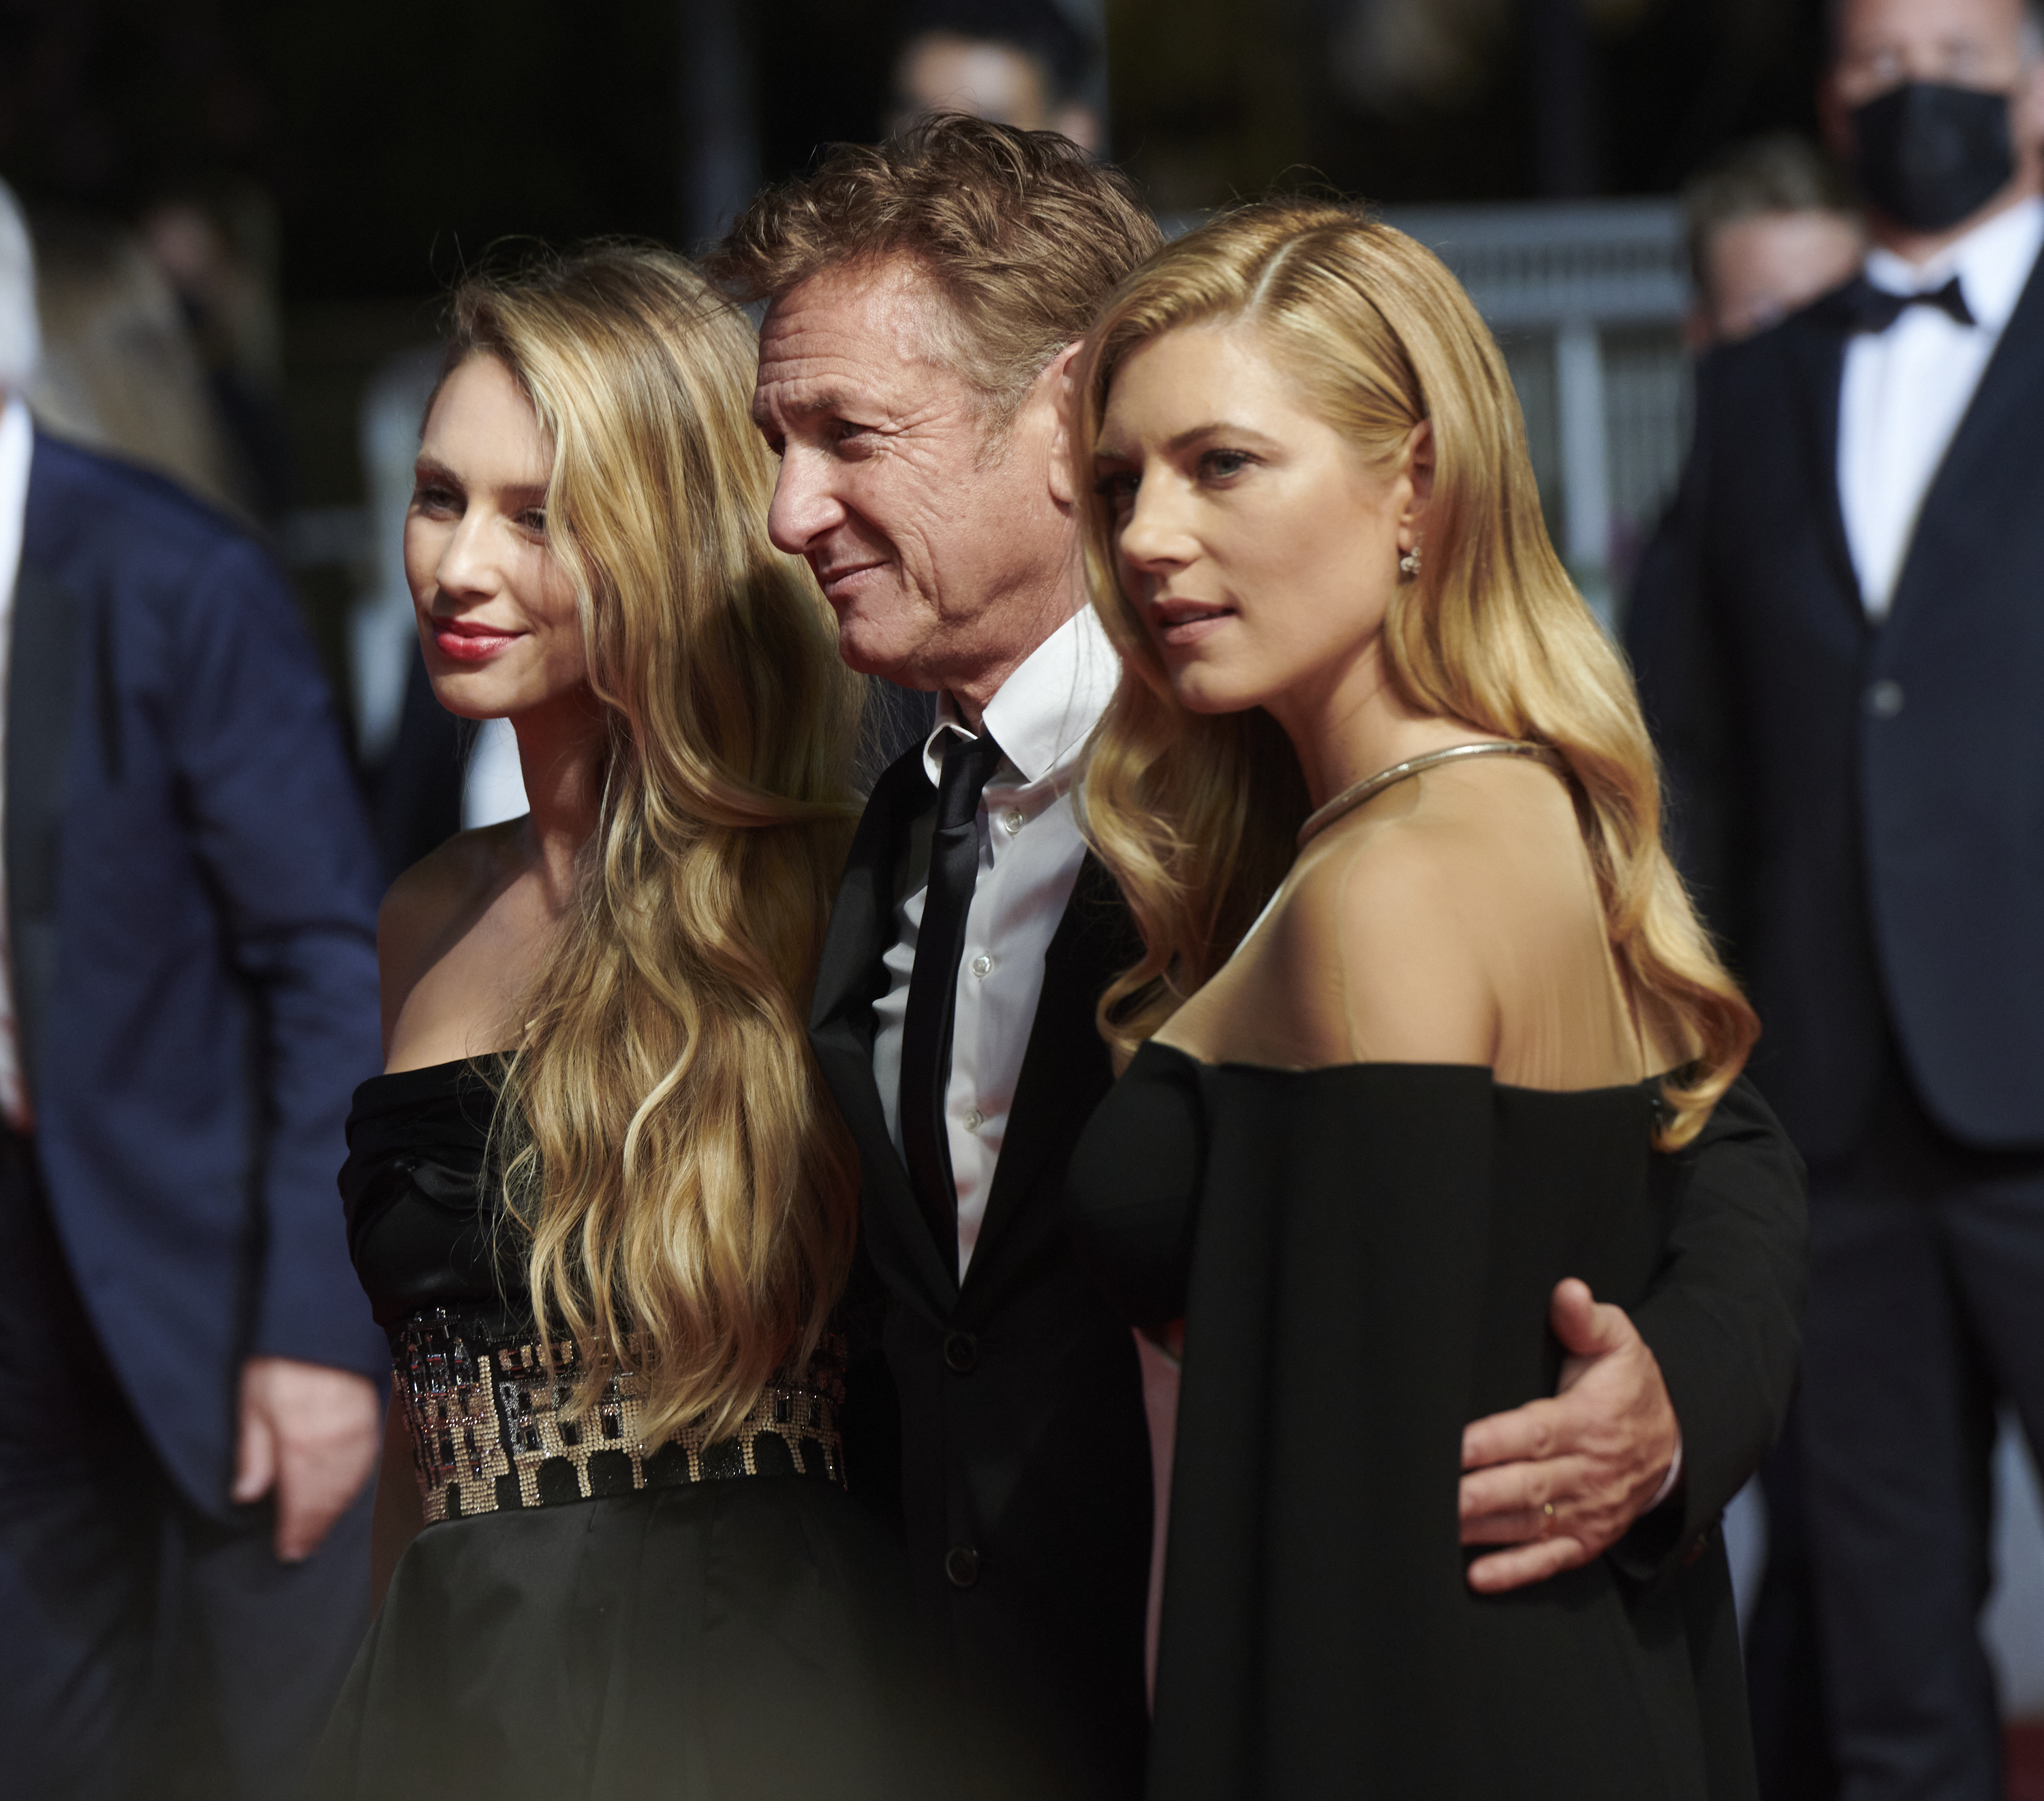 Katheryn Winnick, Sean Penn and Dylan Penn attend the Flag Day screening during the 74th annual Cannes Film Festival on July 10, 2021 in Cannes, France.